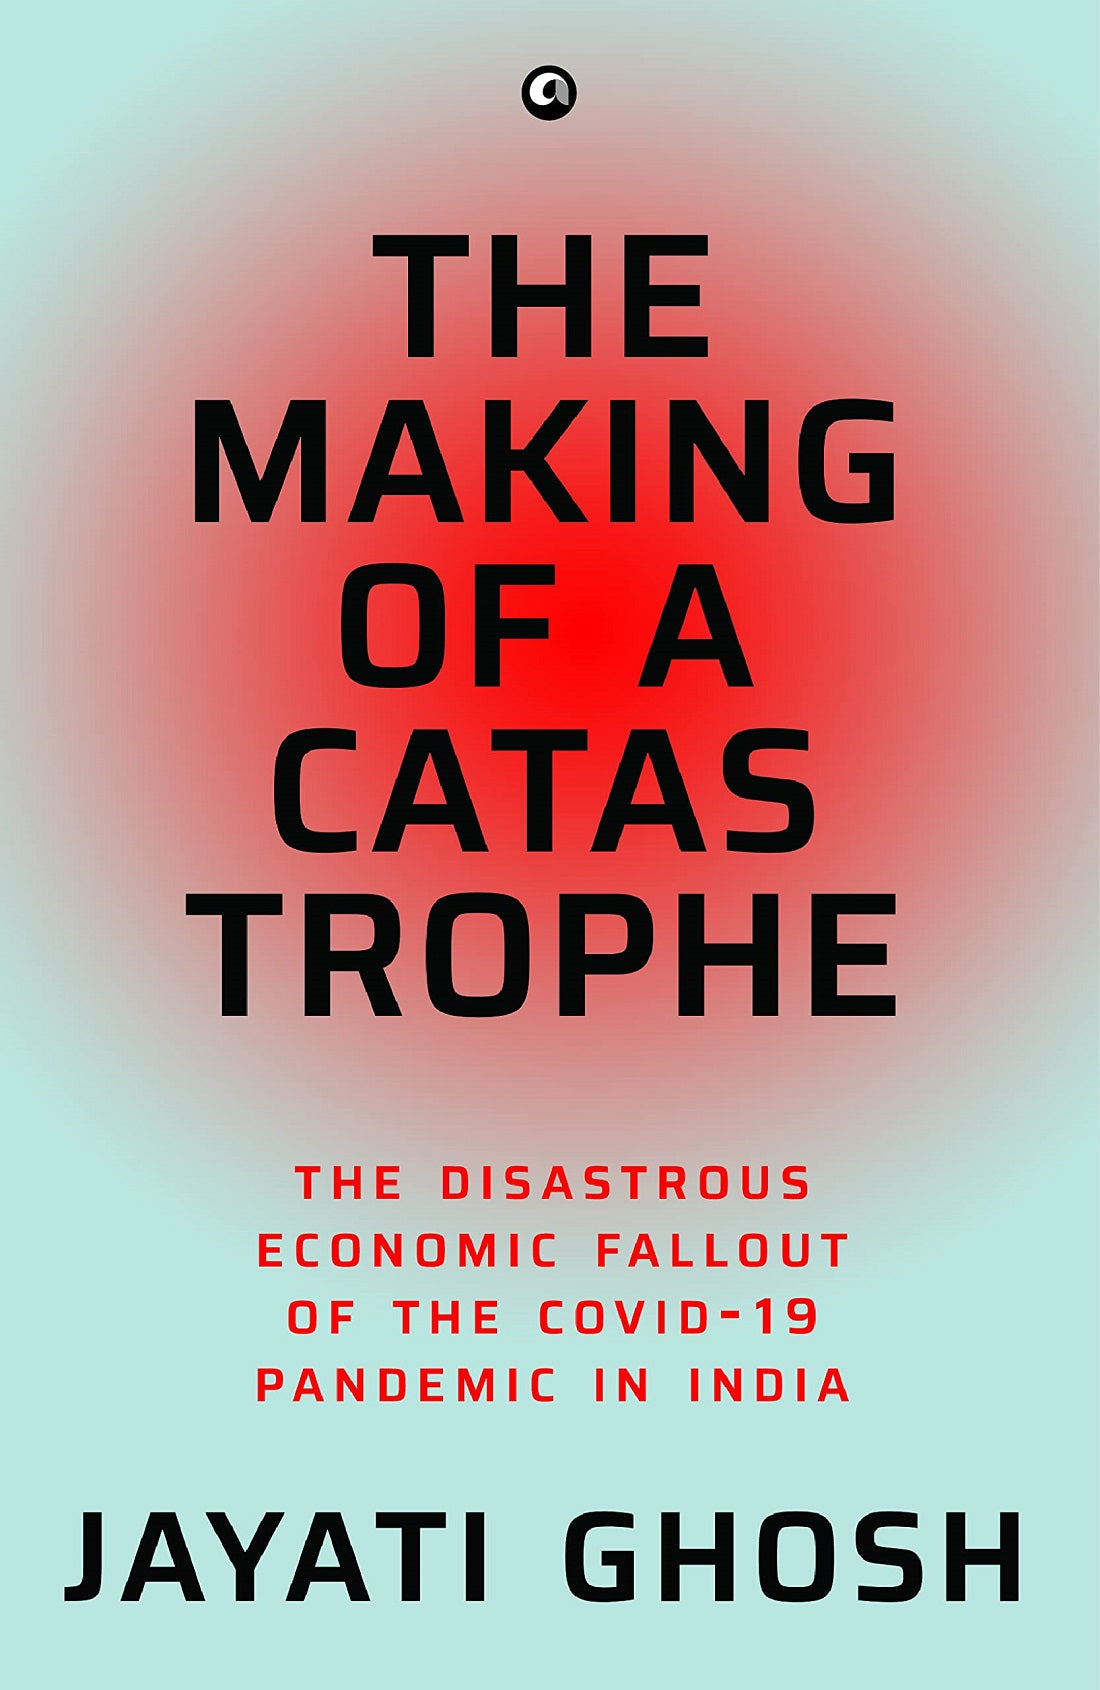 THE MAKING OF A CATASTROPHE